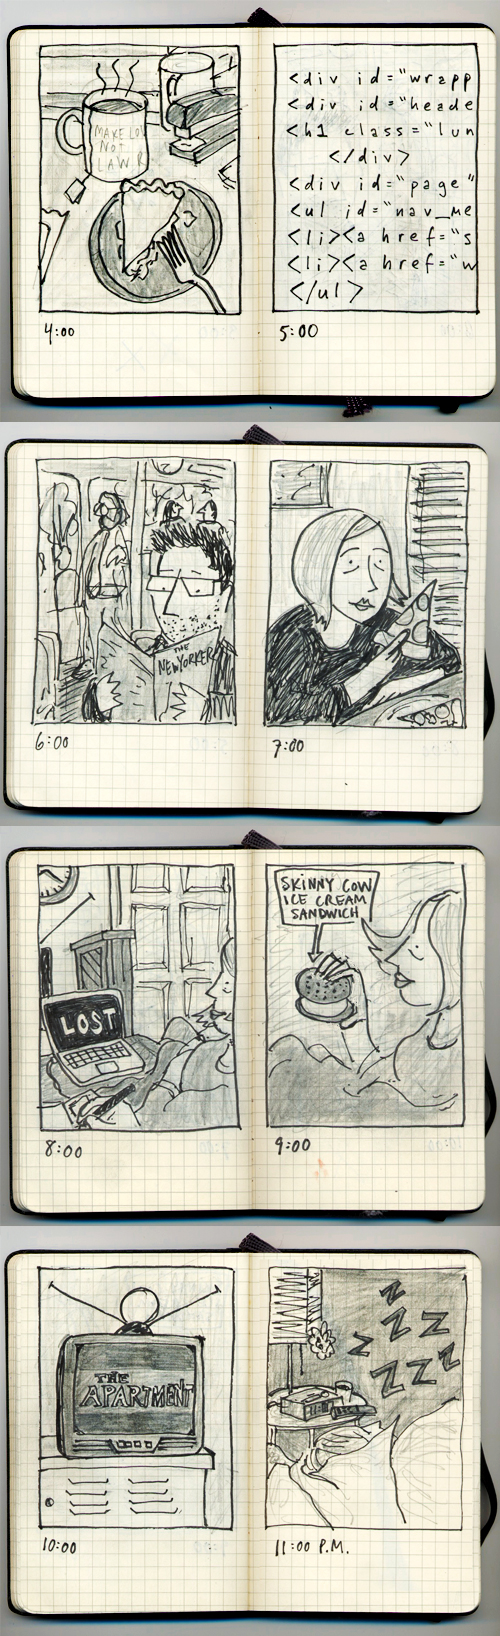 hourly comic 2008 (part two)